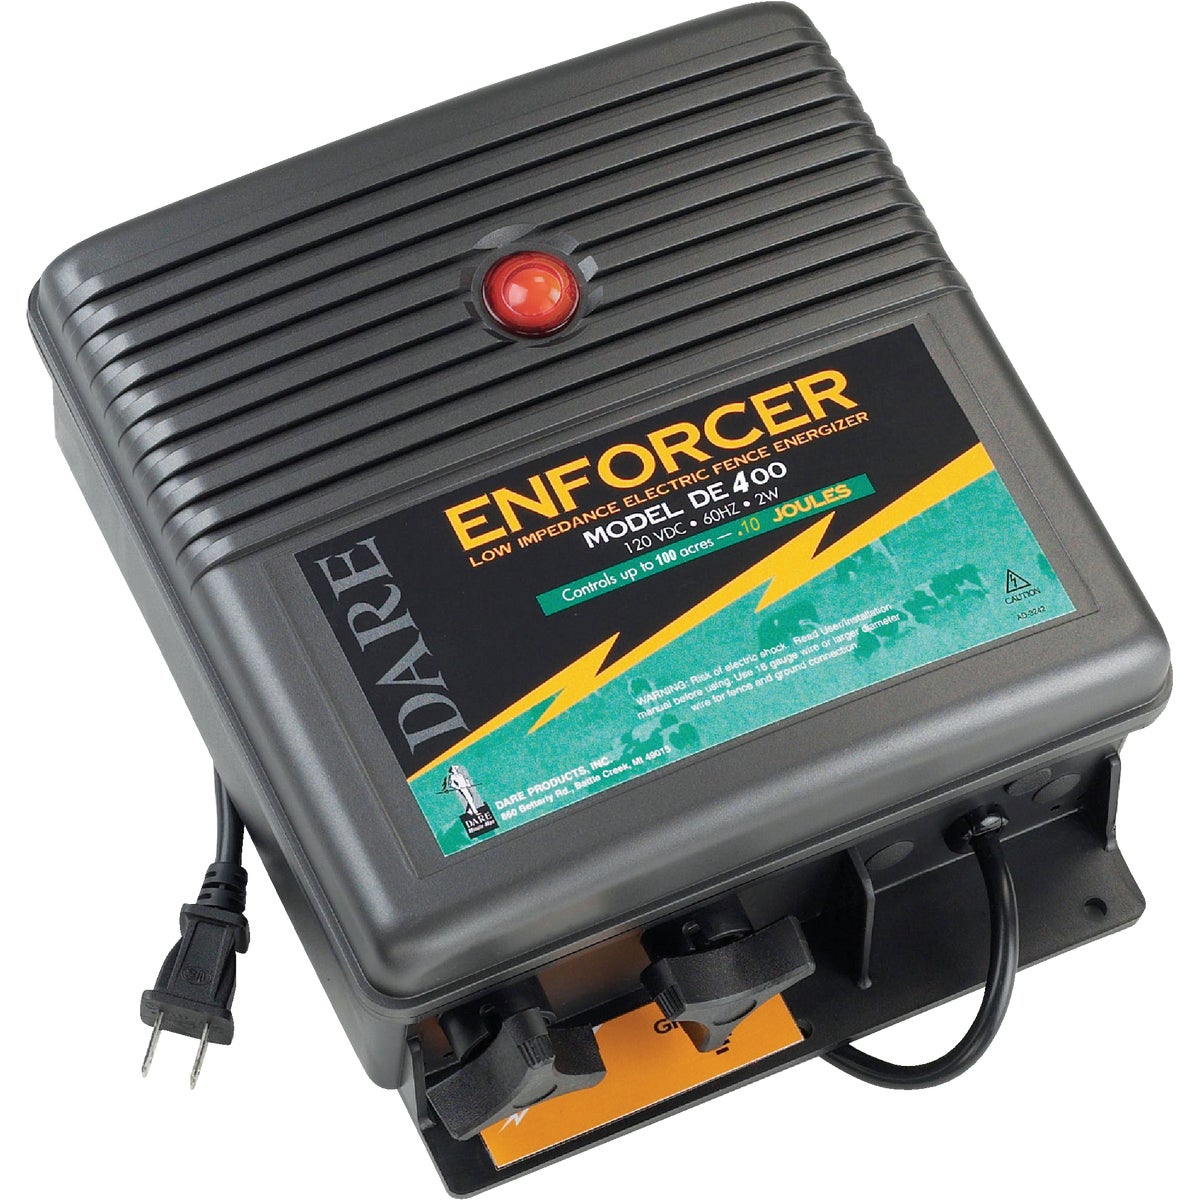 Electric Fence Charger